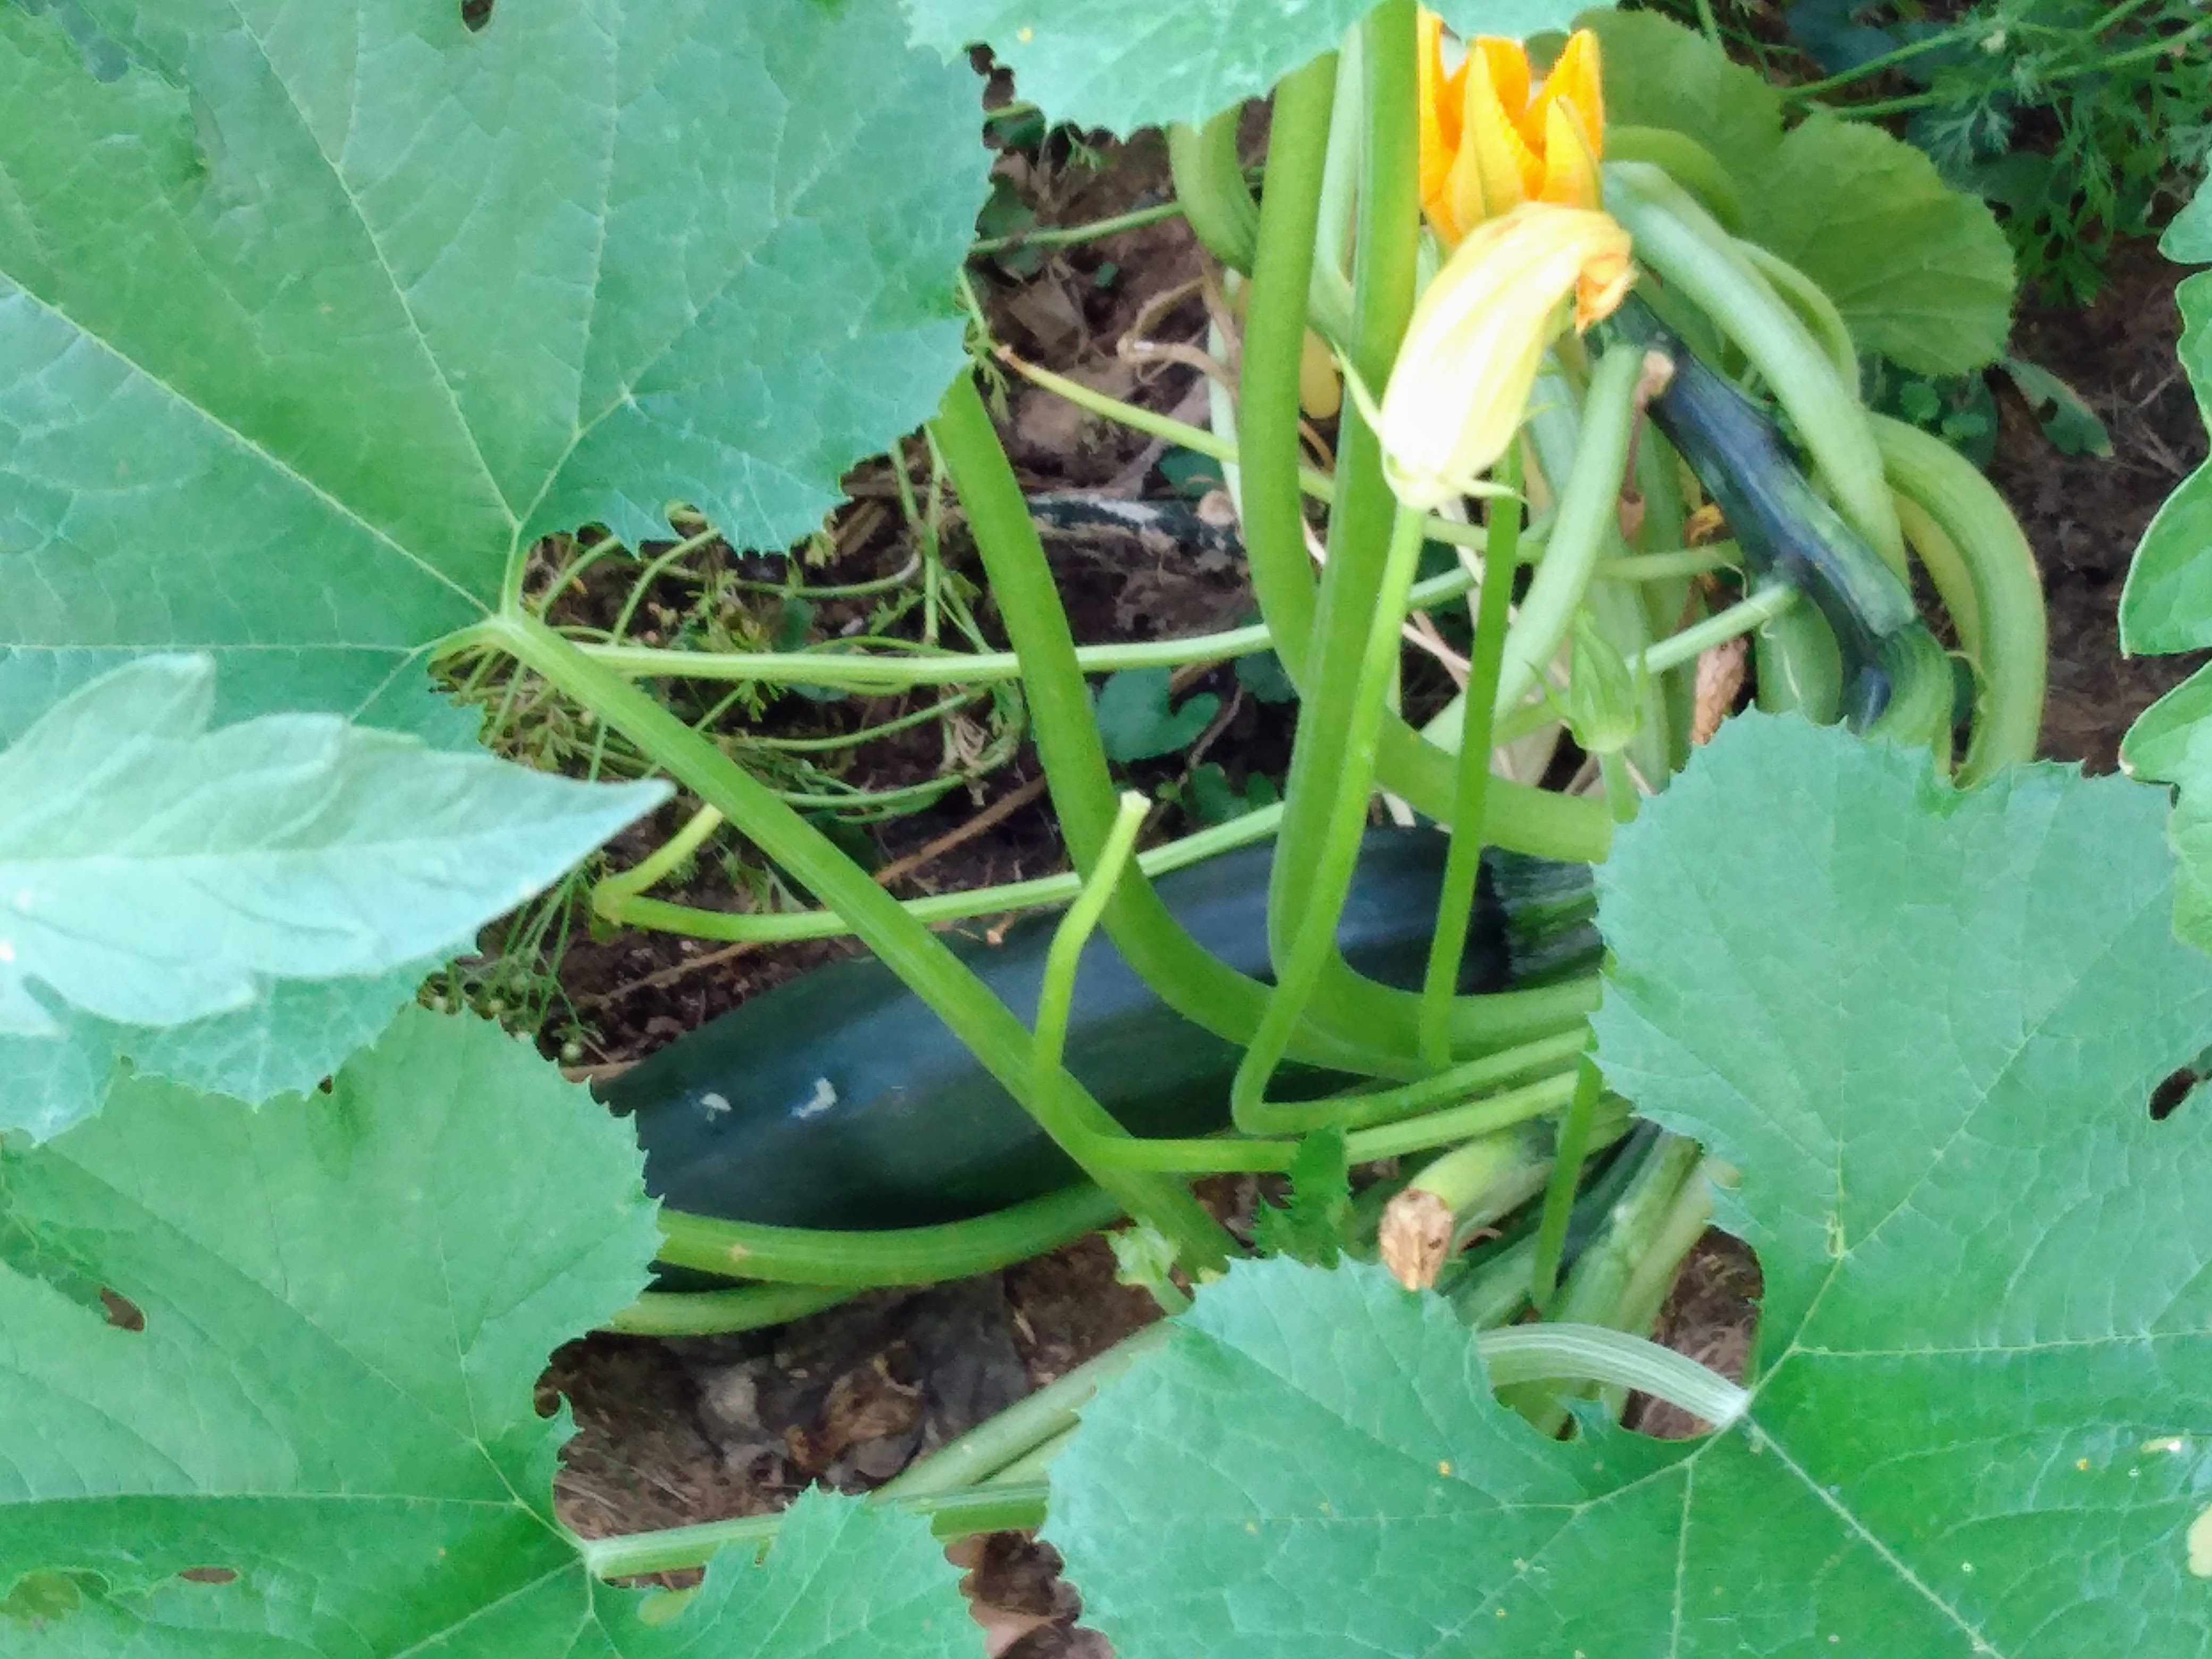 The Zucchini in the crowed plot.